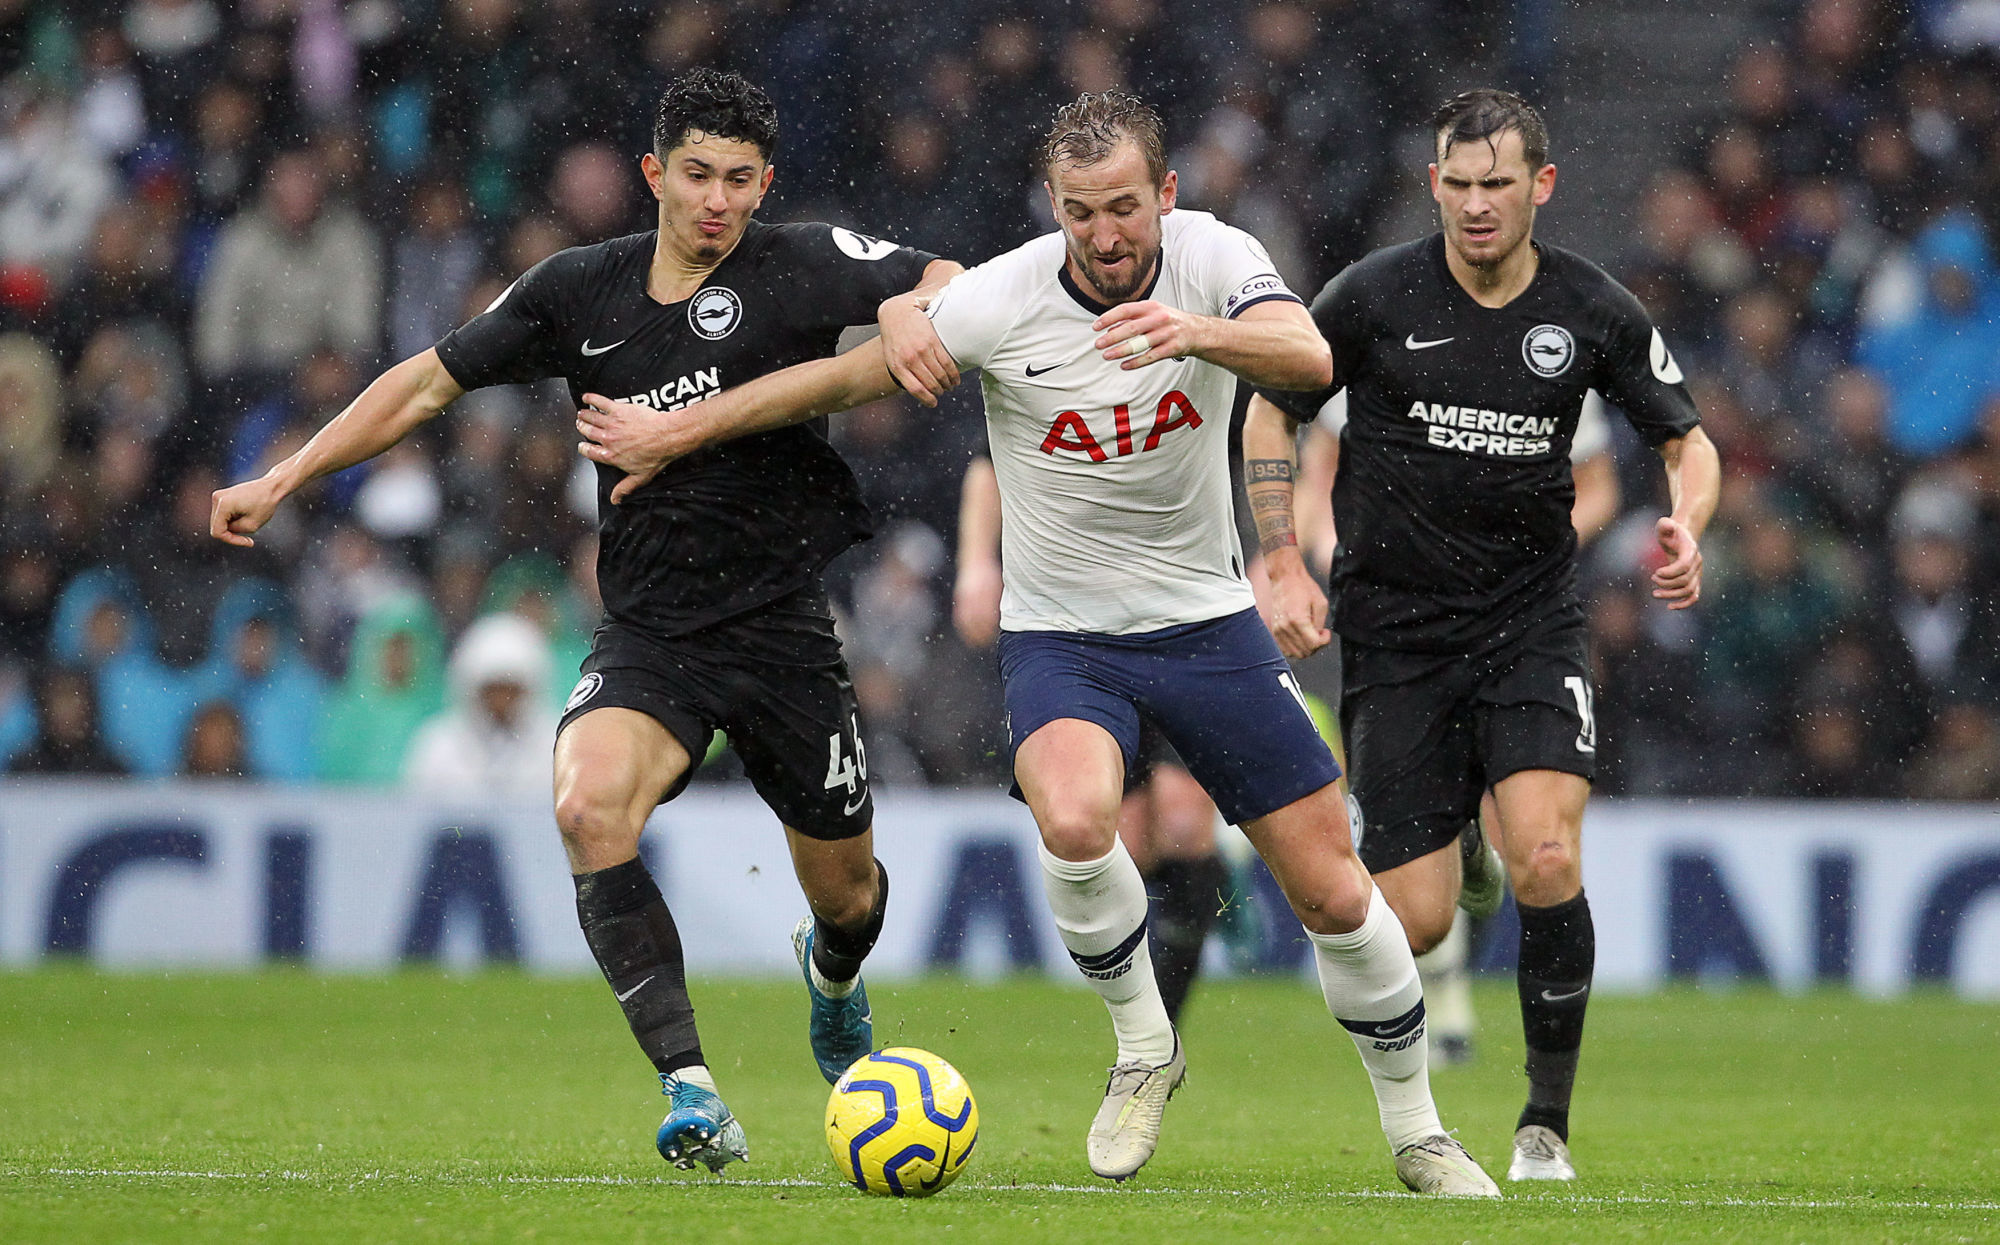 Tottenham’s Harry Kane is challenged by Brighton’s Steven Alzate during the Premier League match at the Tottenham Hotspur Stadium, London. Picture date: 26th December 2019. 
Photo : Spi / Icon Sport